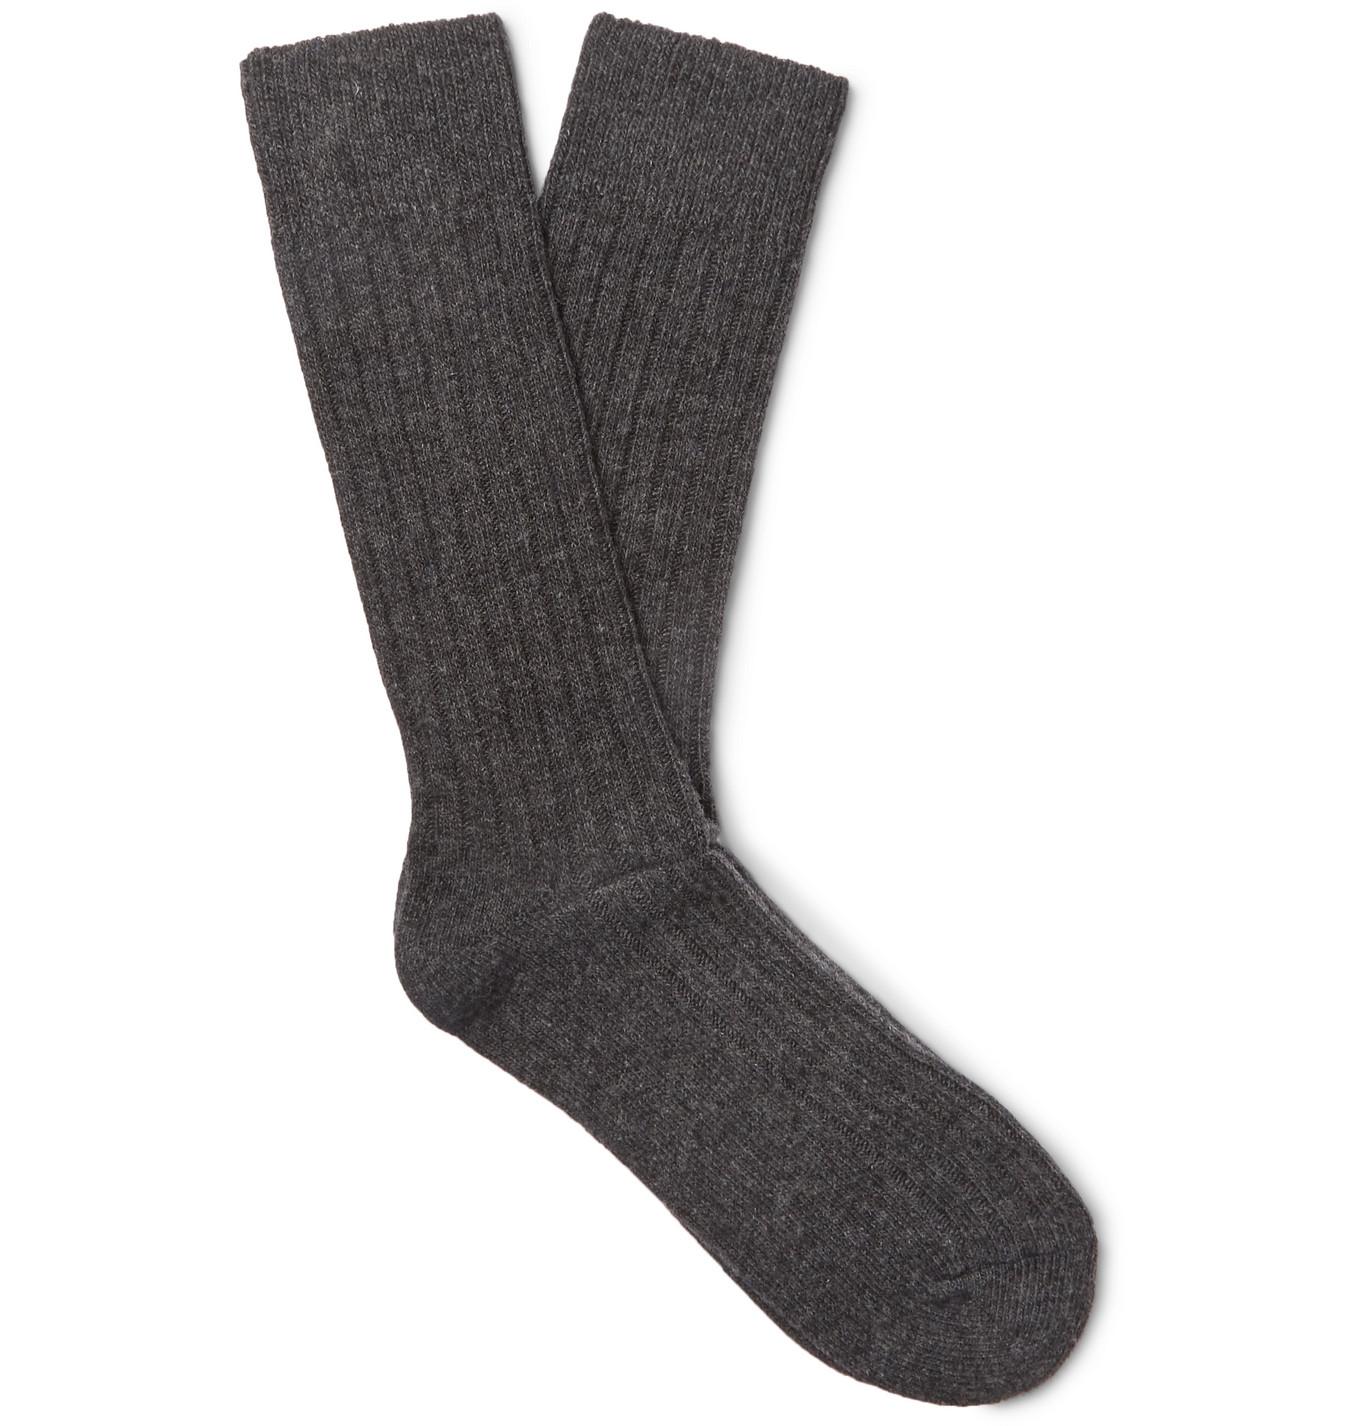 Anderson & Sheppard Ribbed Wool-blend Socks in Gray for Men - Lyst